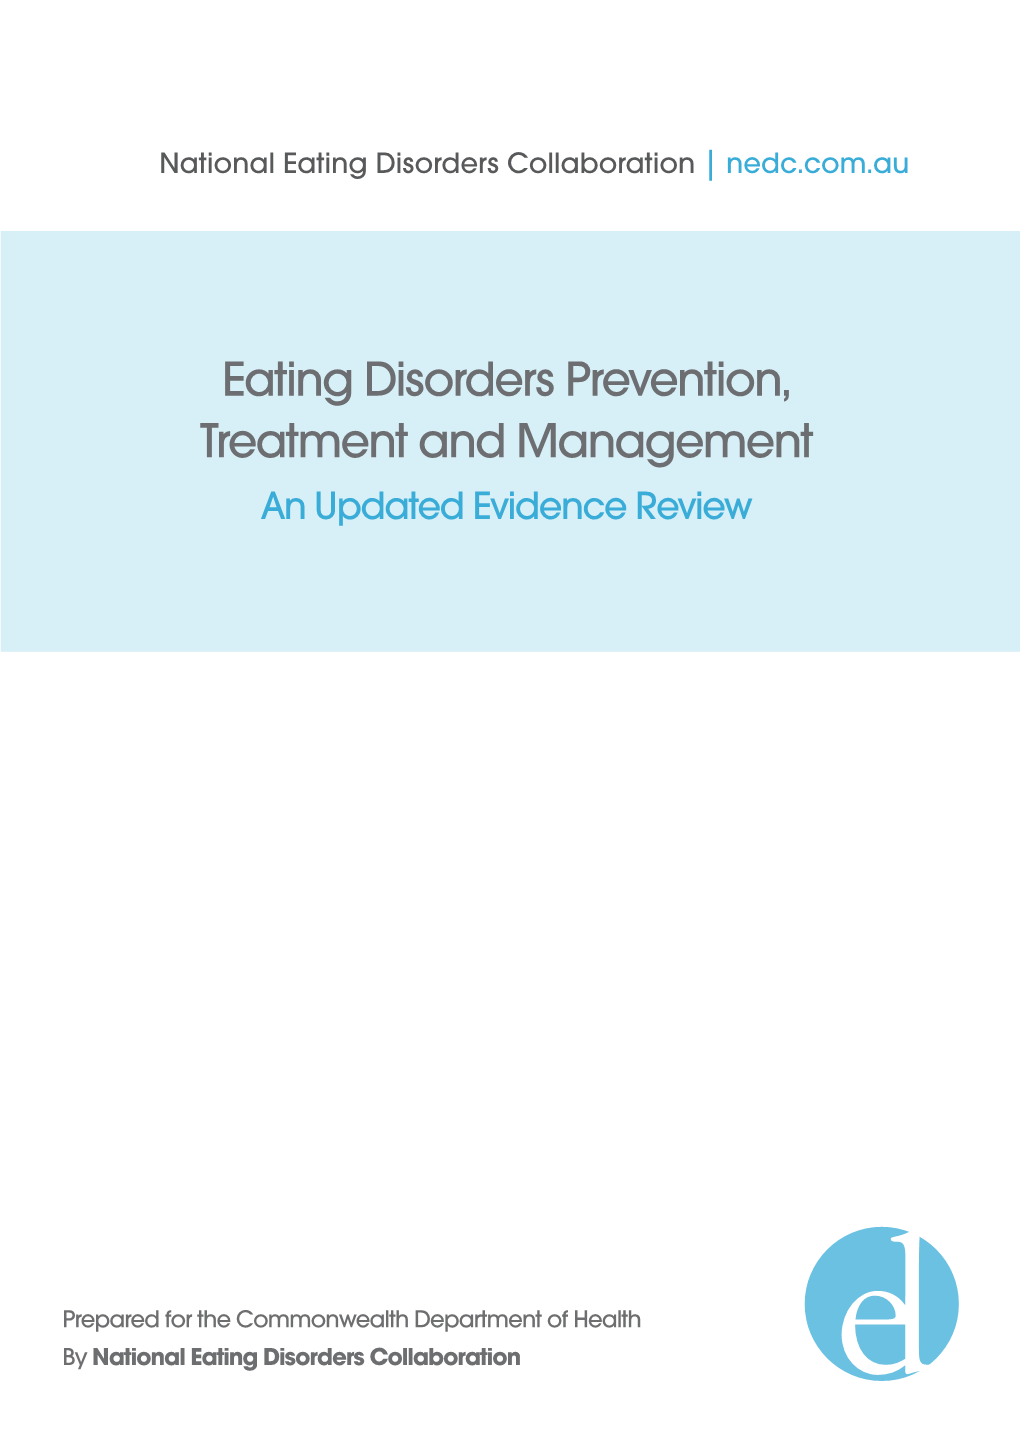 Evidence Review on Body Image and Eating Disorders